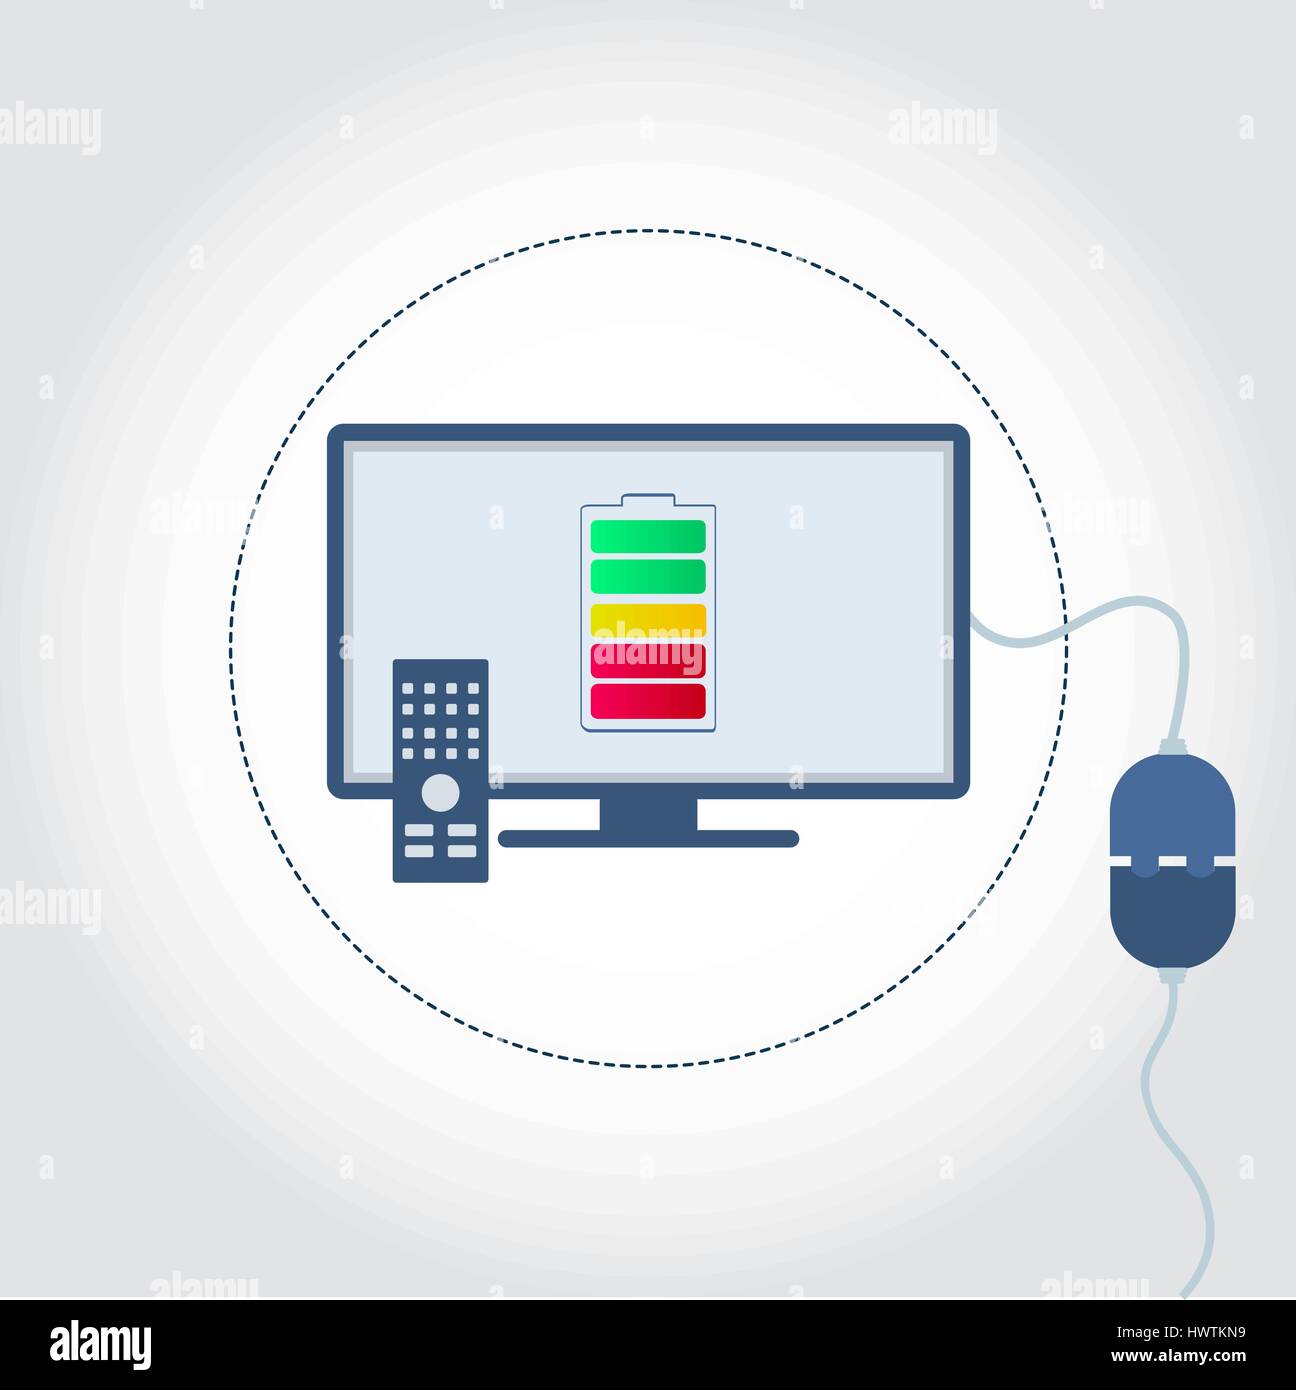 Tv with a plug plugged in and battery symbol on monitor showing charge level. Stock Vector